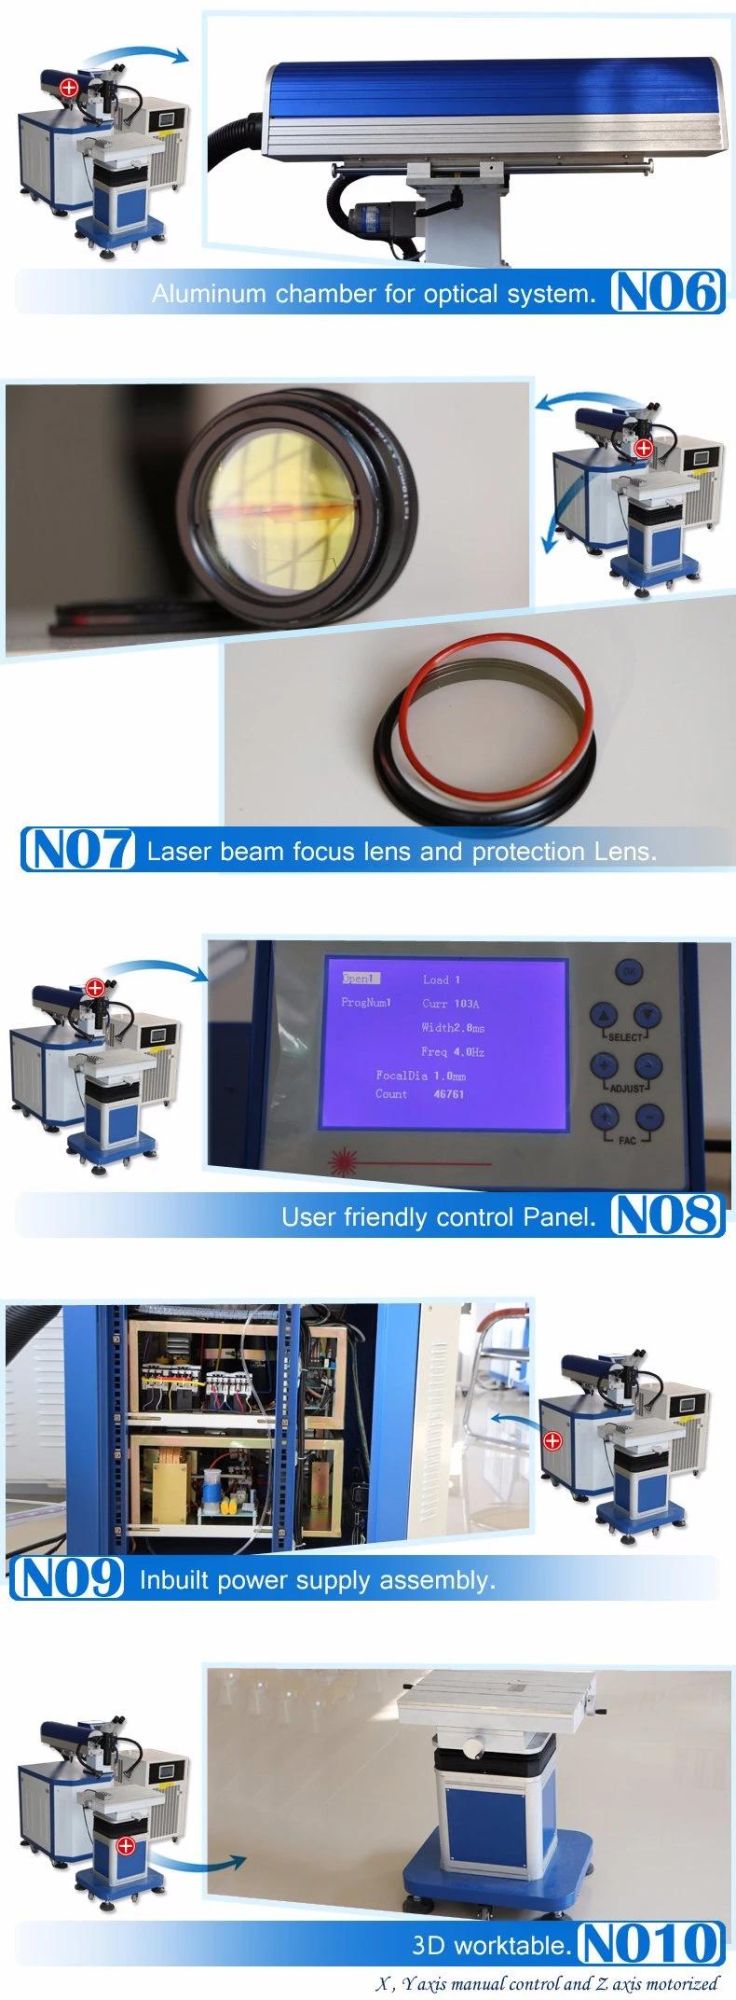 2018 Automatic Laser Perfect Mold Repair Welding and Welder Machine